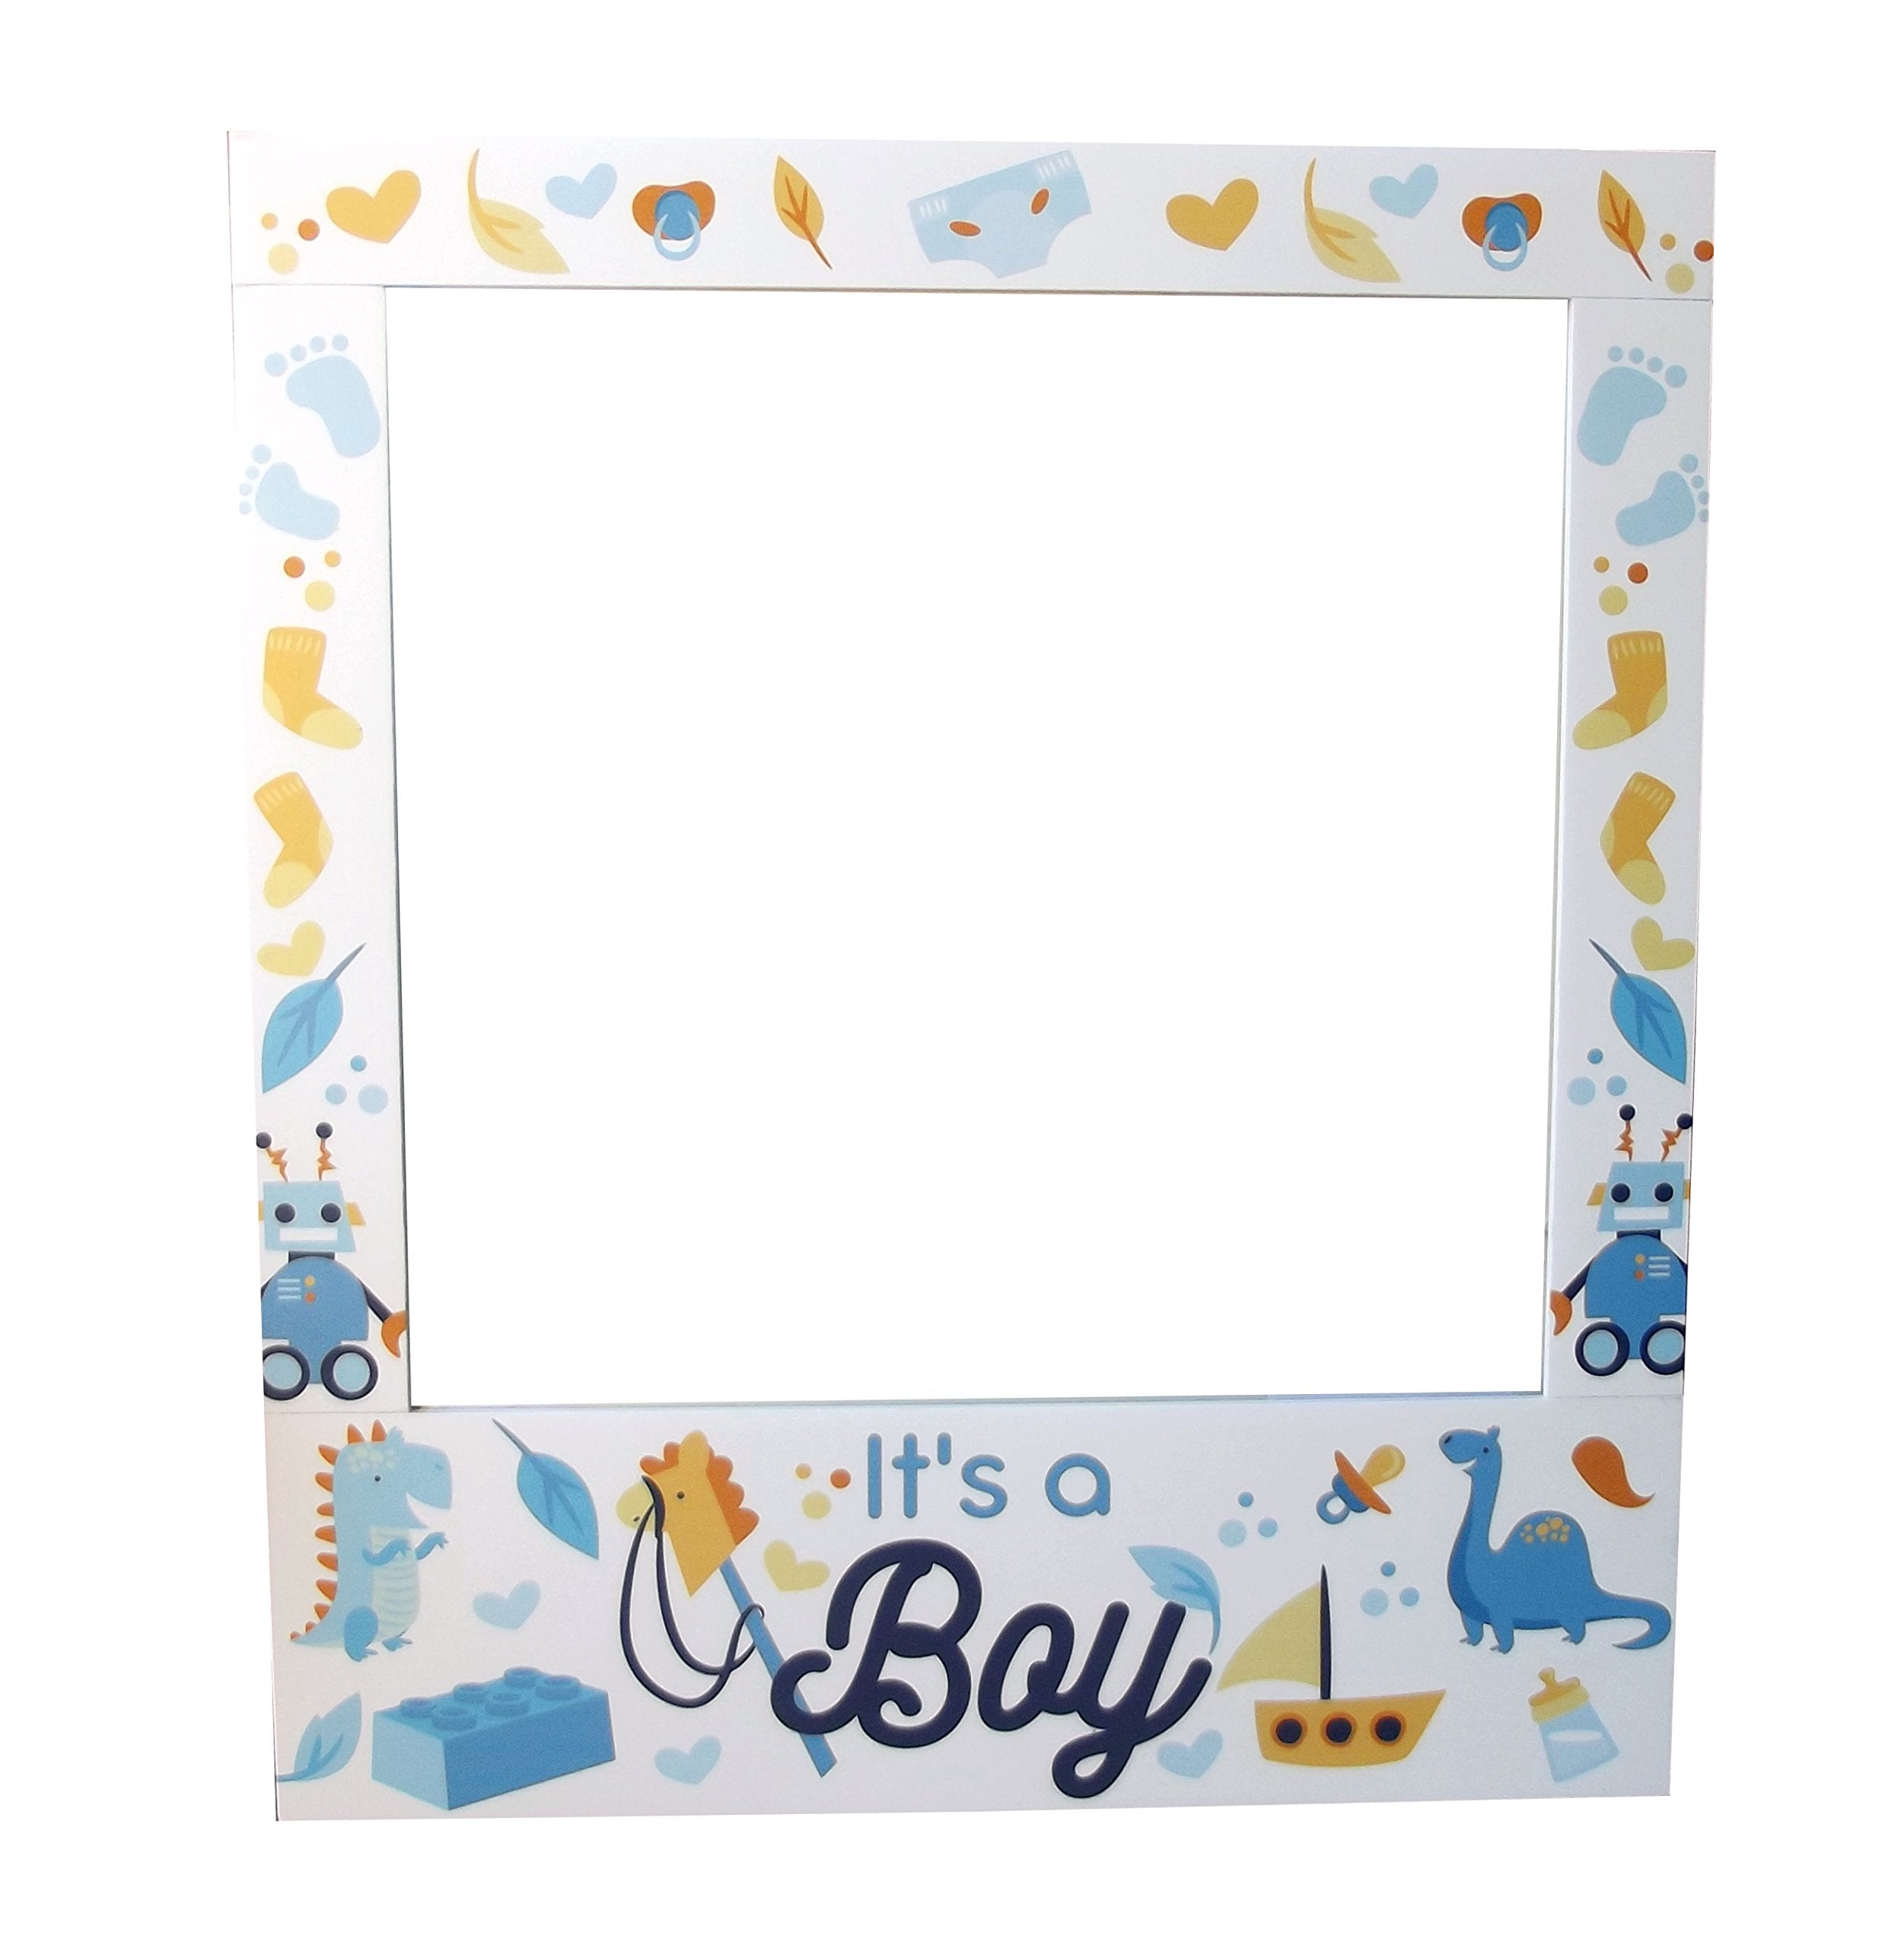 Aahs Engraving Baby Shower Party Frame Photo Prop, 35 X 30 inches (Boy)